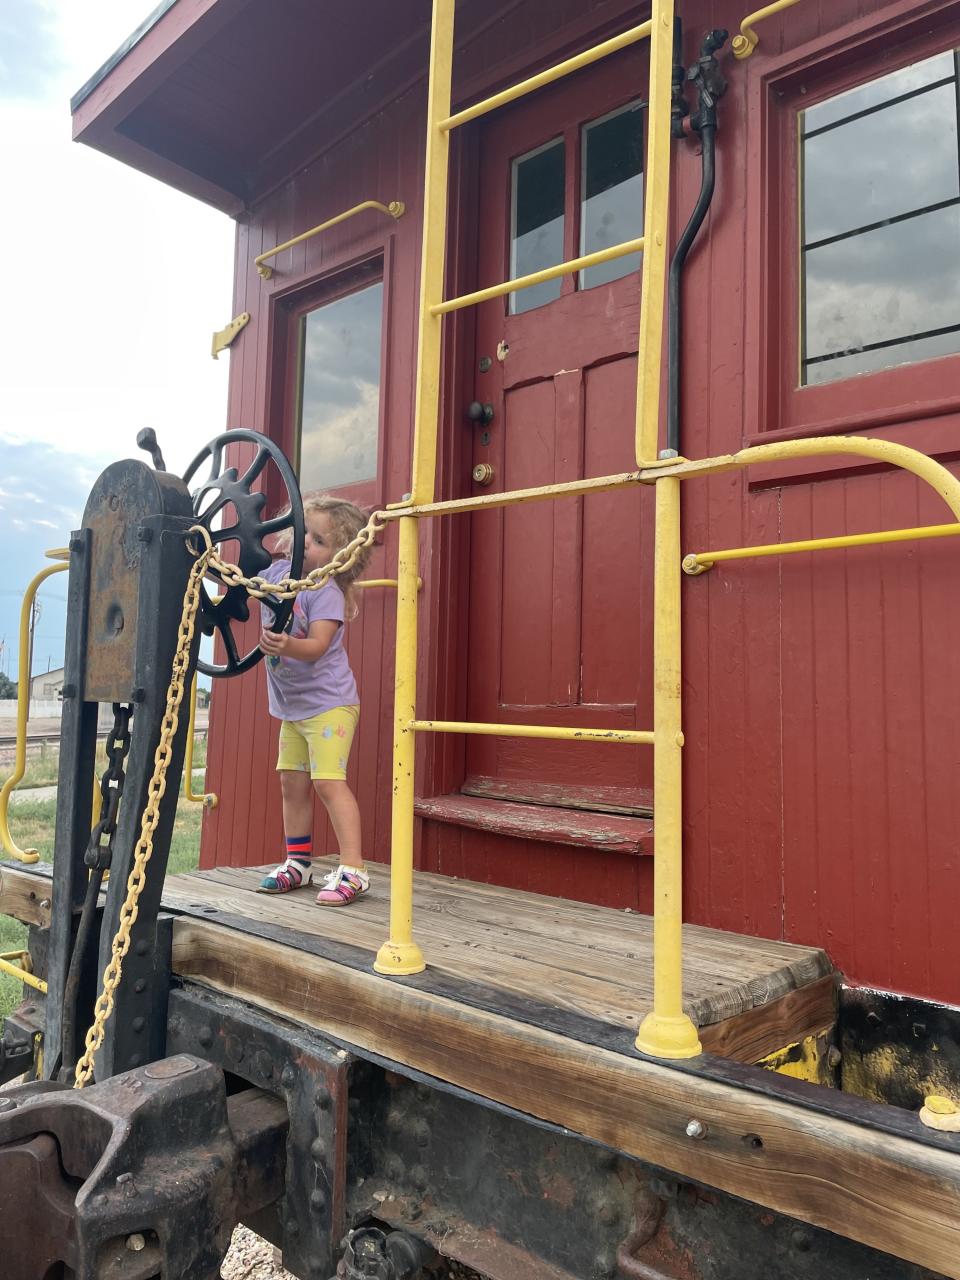 The author's daughter exploring a train